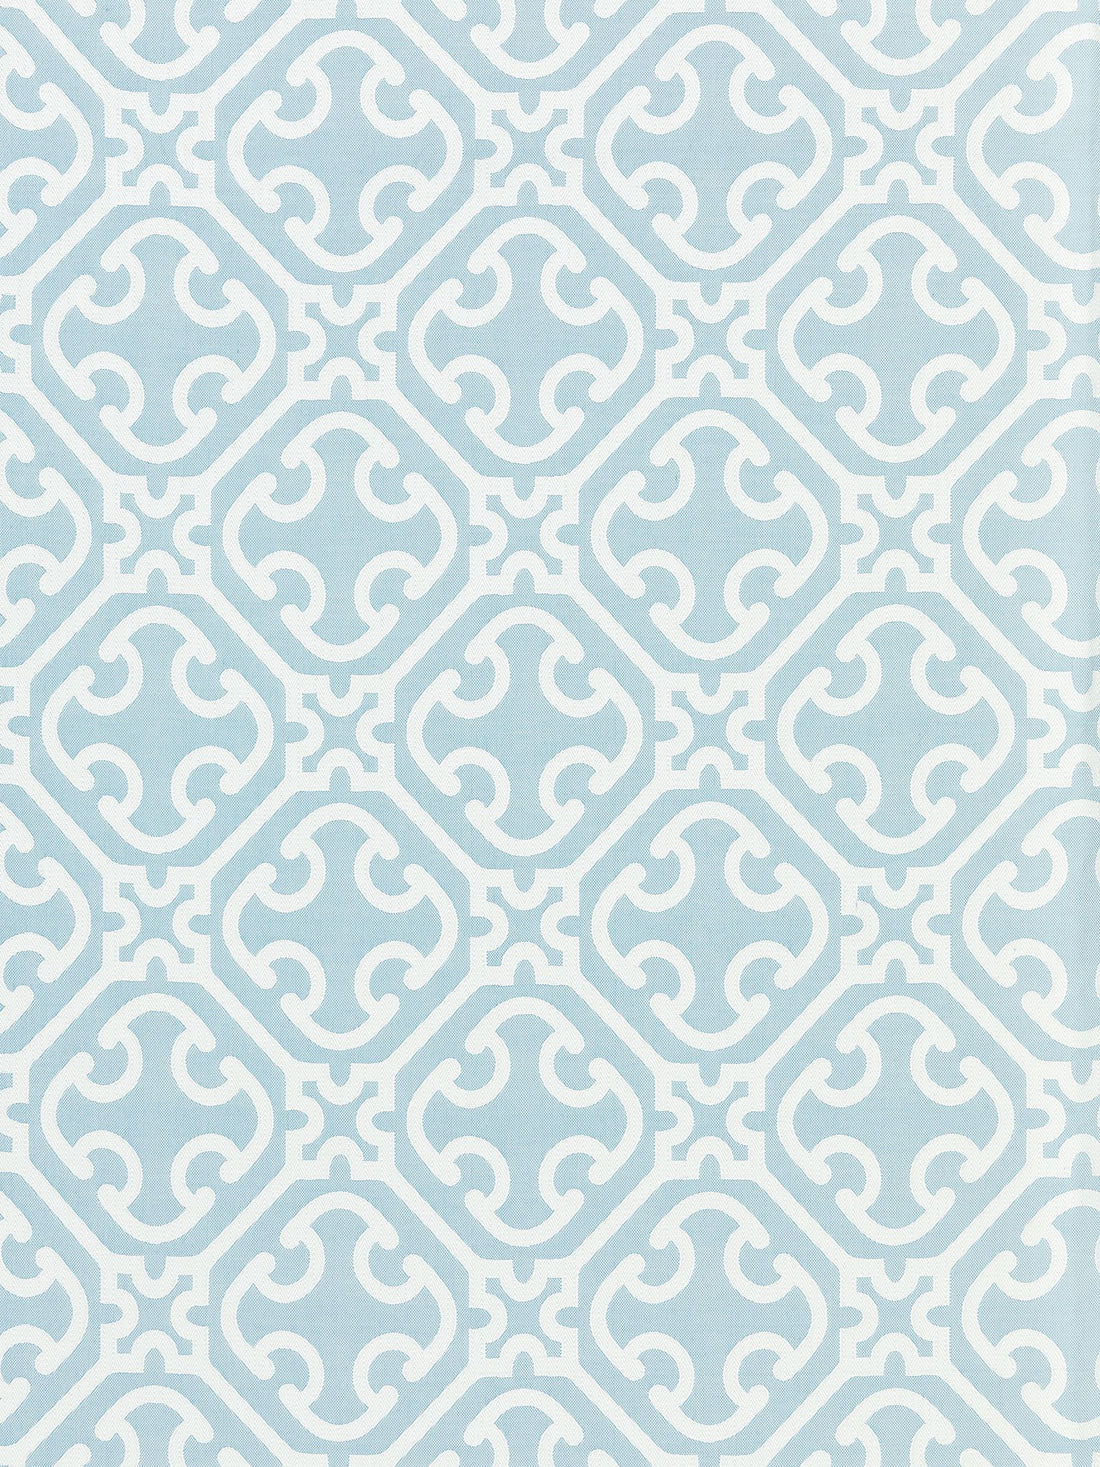 Ailin Lattice Weave fabric in capri color - pattern number SC 000327214 - by Scalamandre in the Scalamandre Fabrics Book 1 collection